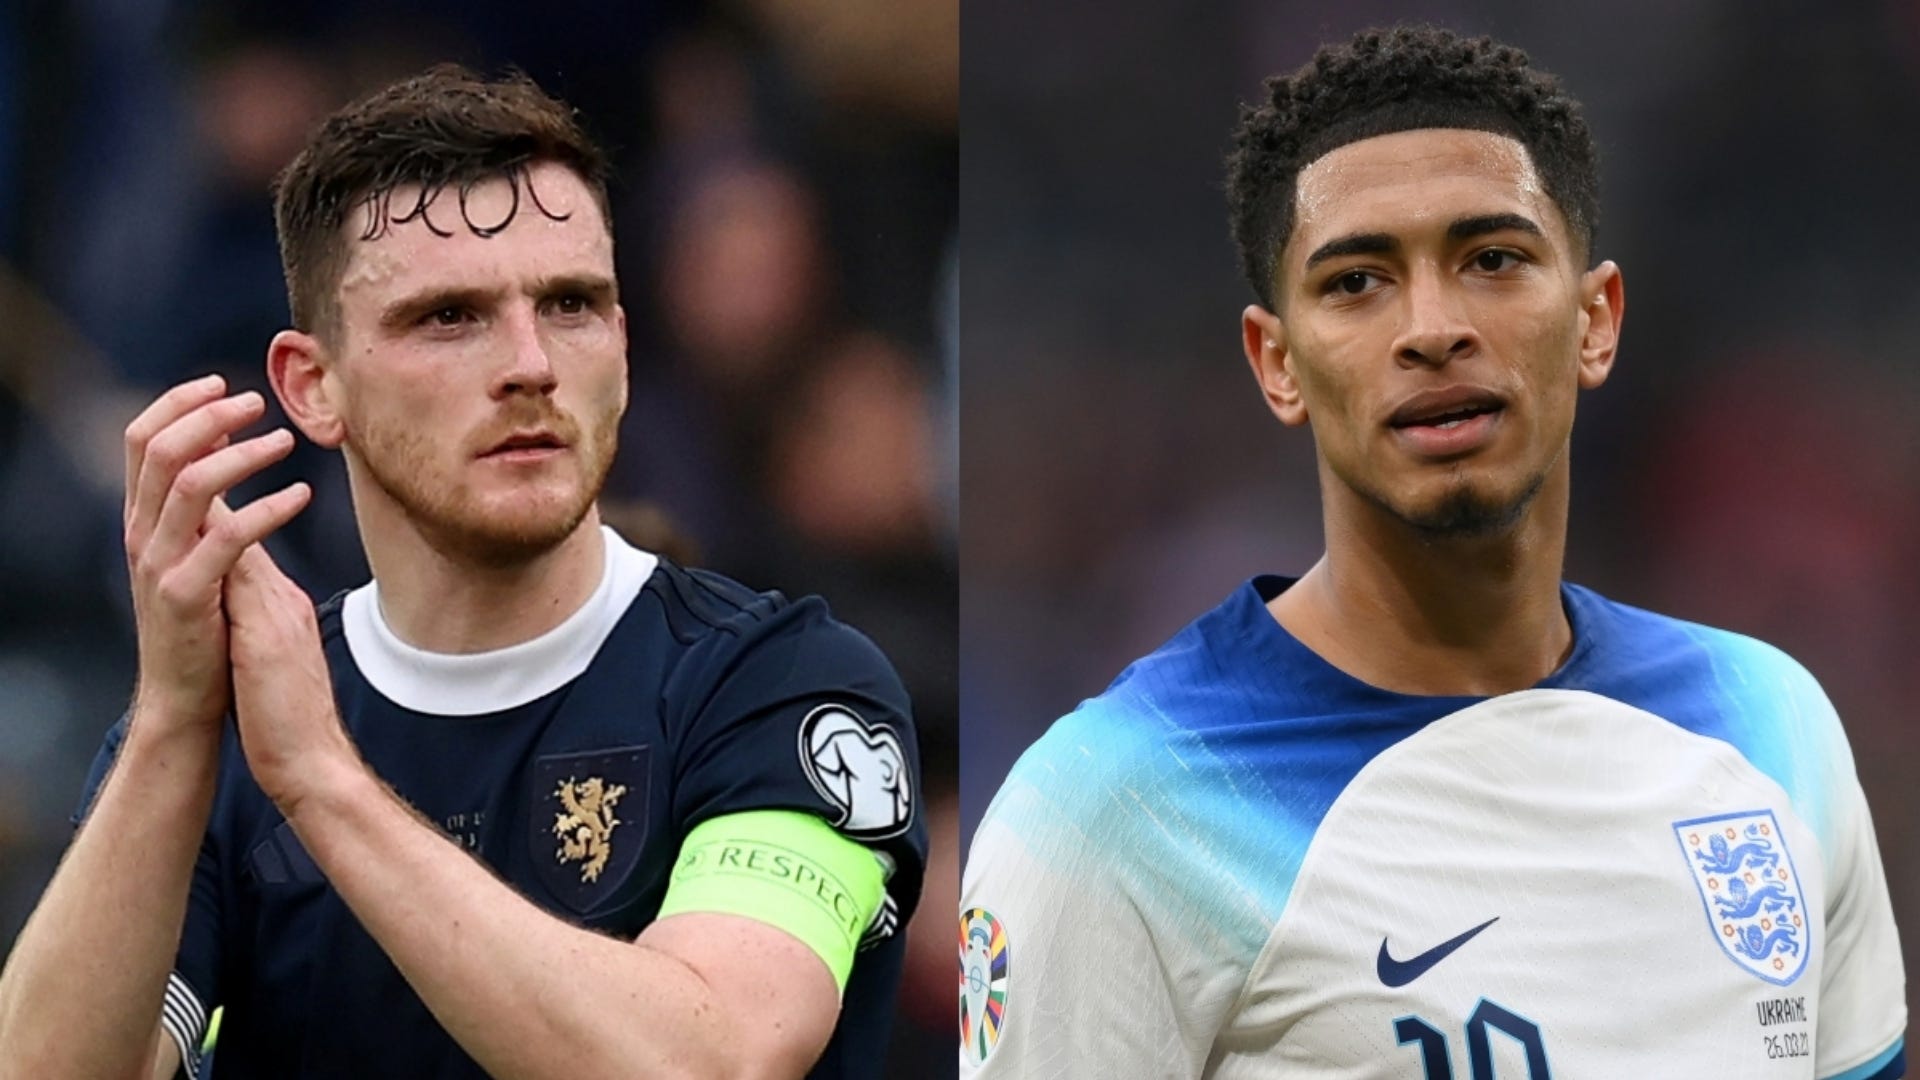 Scotland vs England Live stream, TV channel, kick-off time and where to watch Goal UK